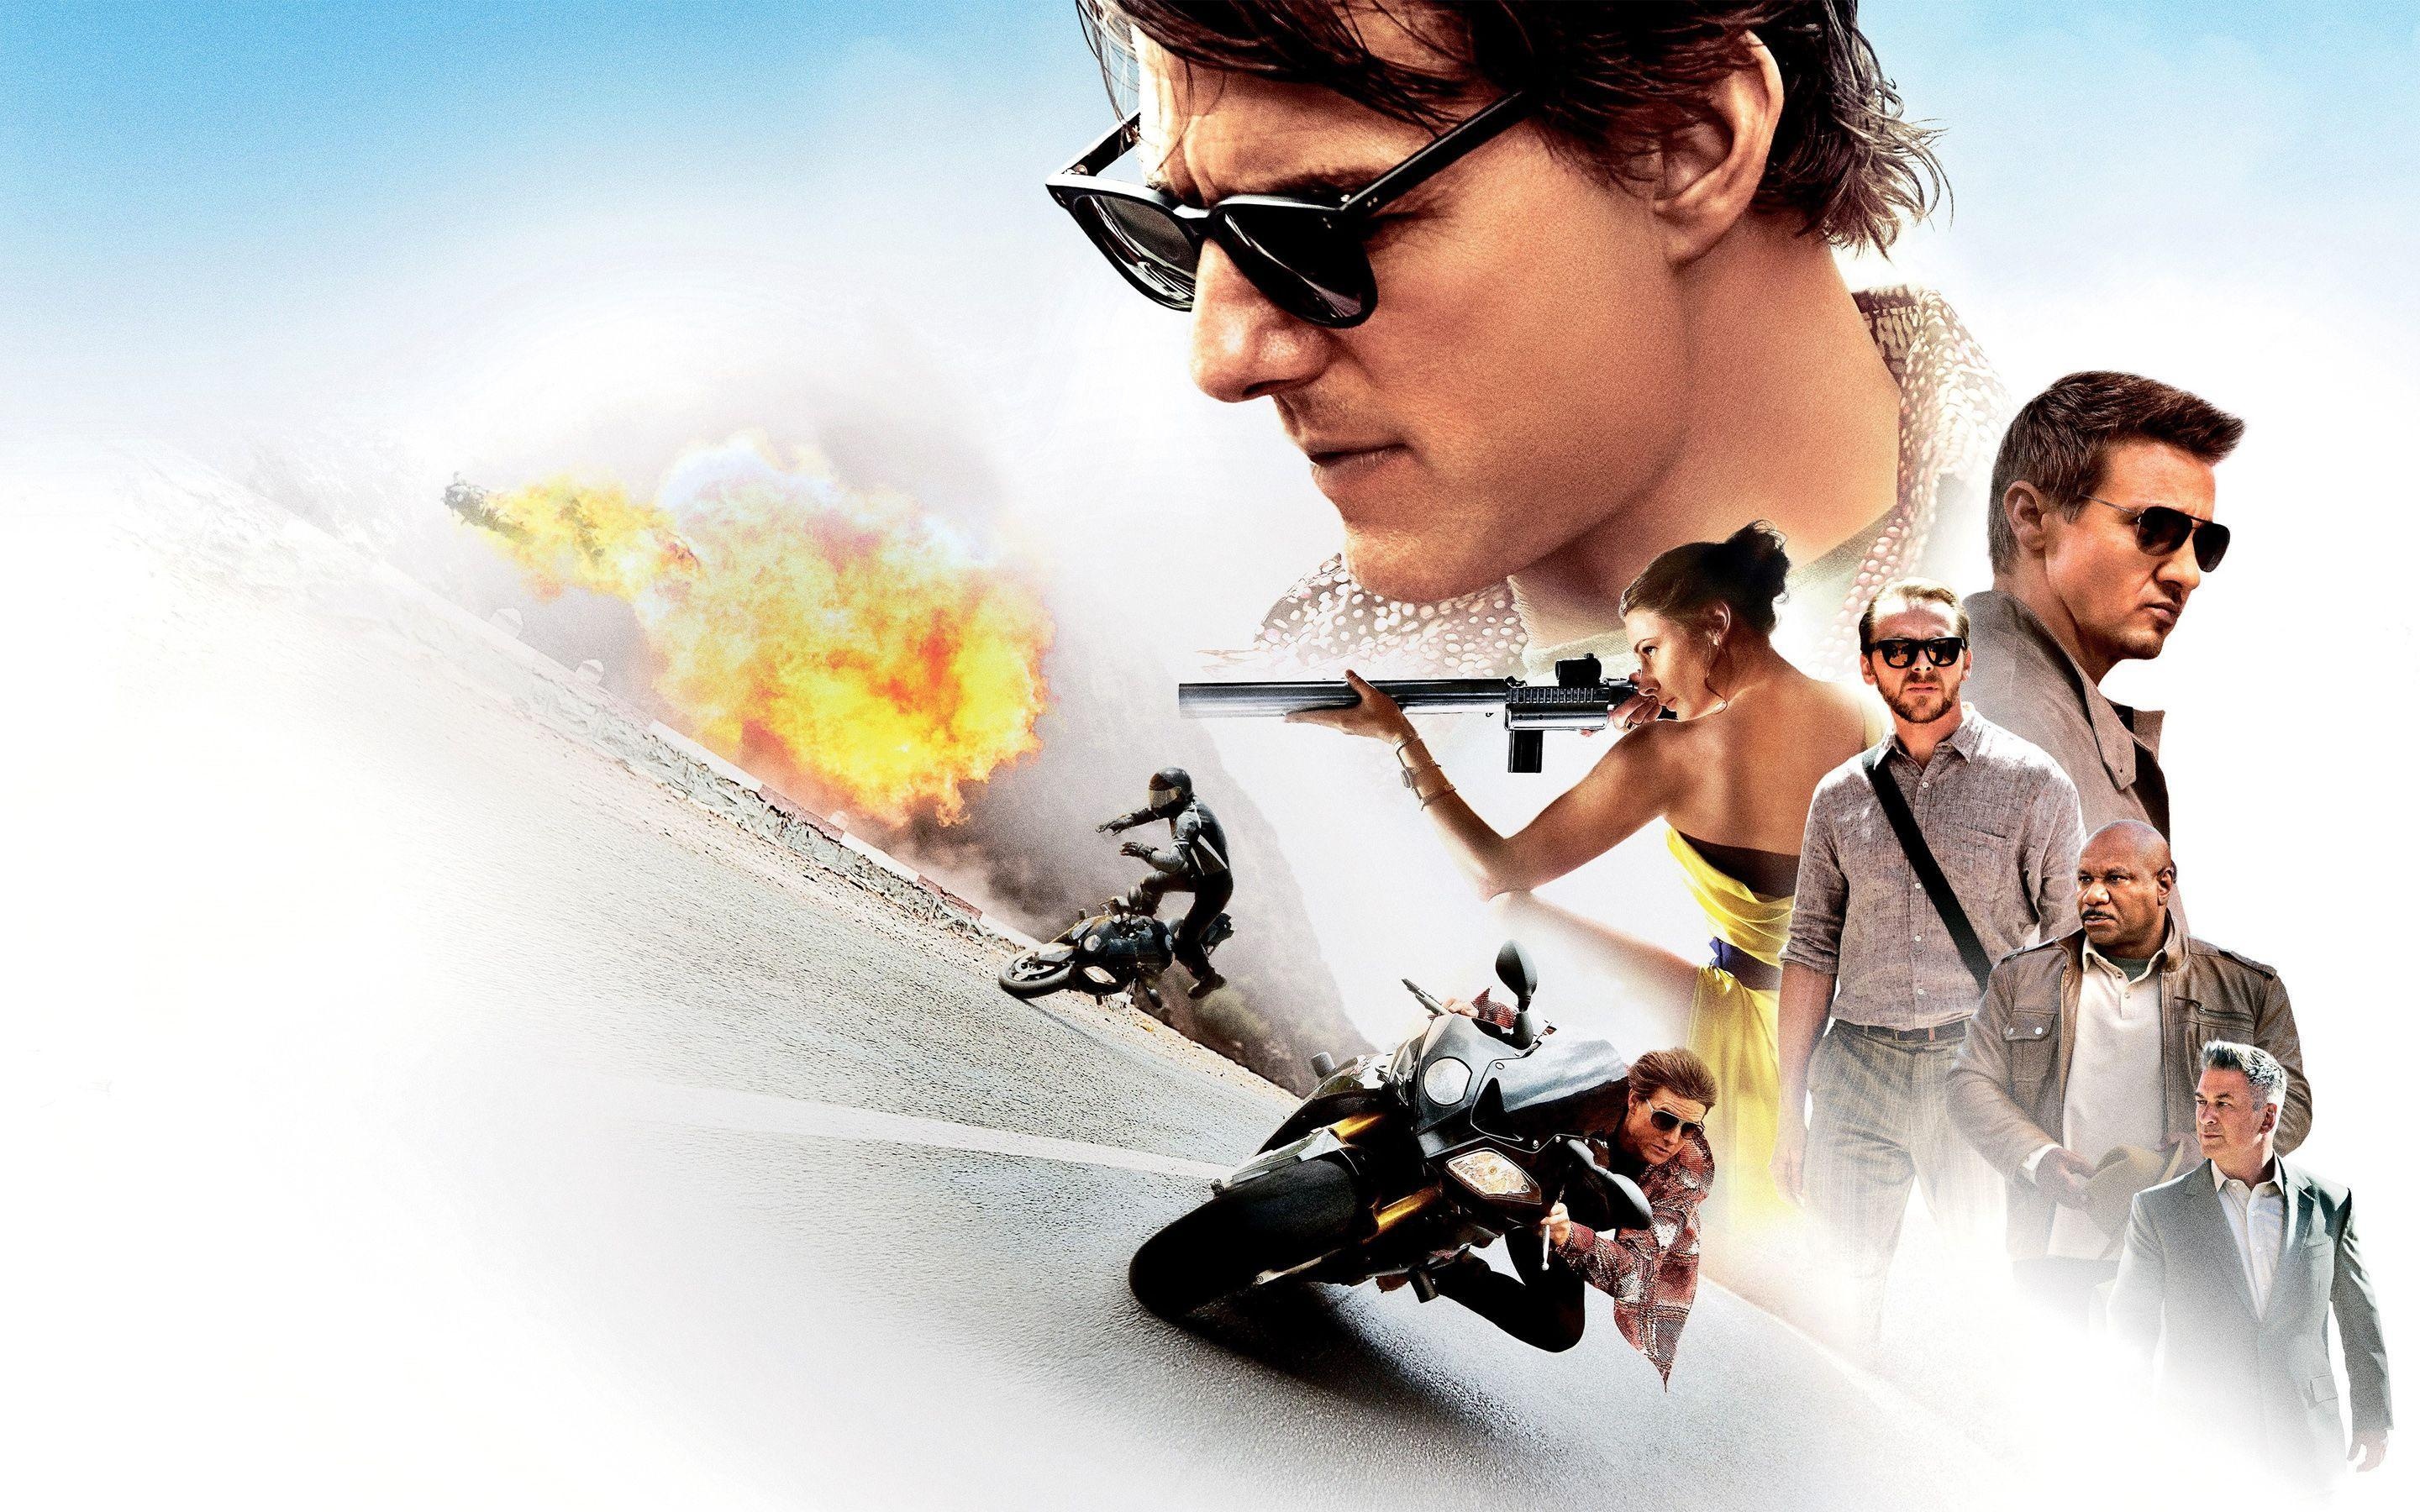 Mission: Impossible, Action adventure, Thrilling missions, Tom Cruise's heroics, 2880x1800 HD Desktop